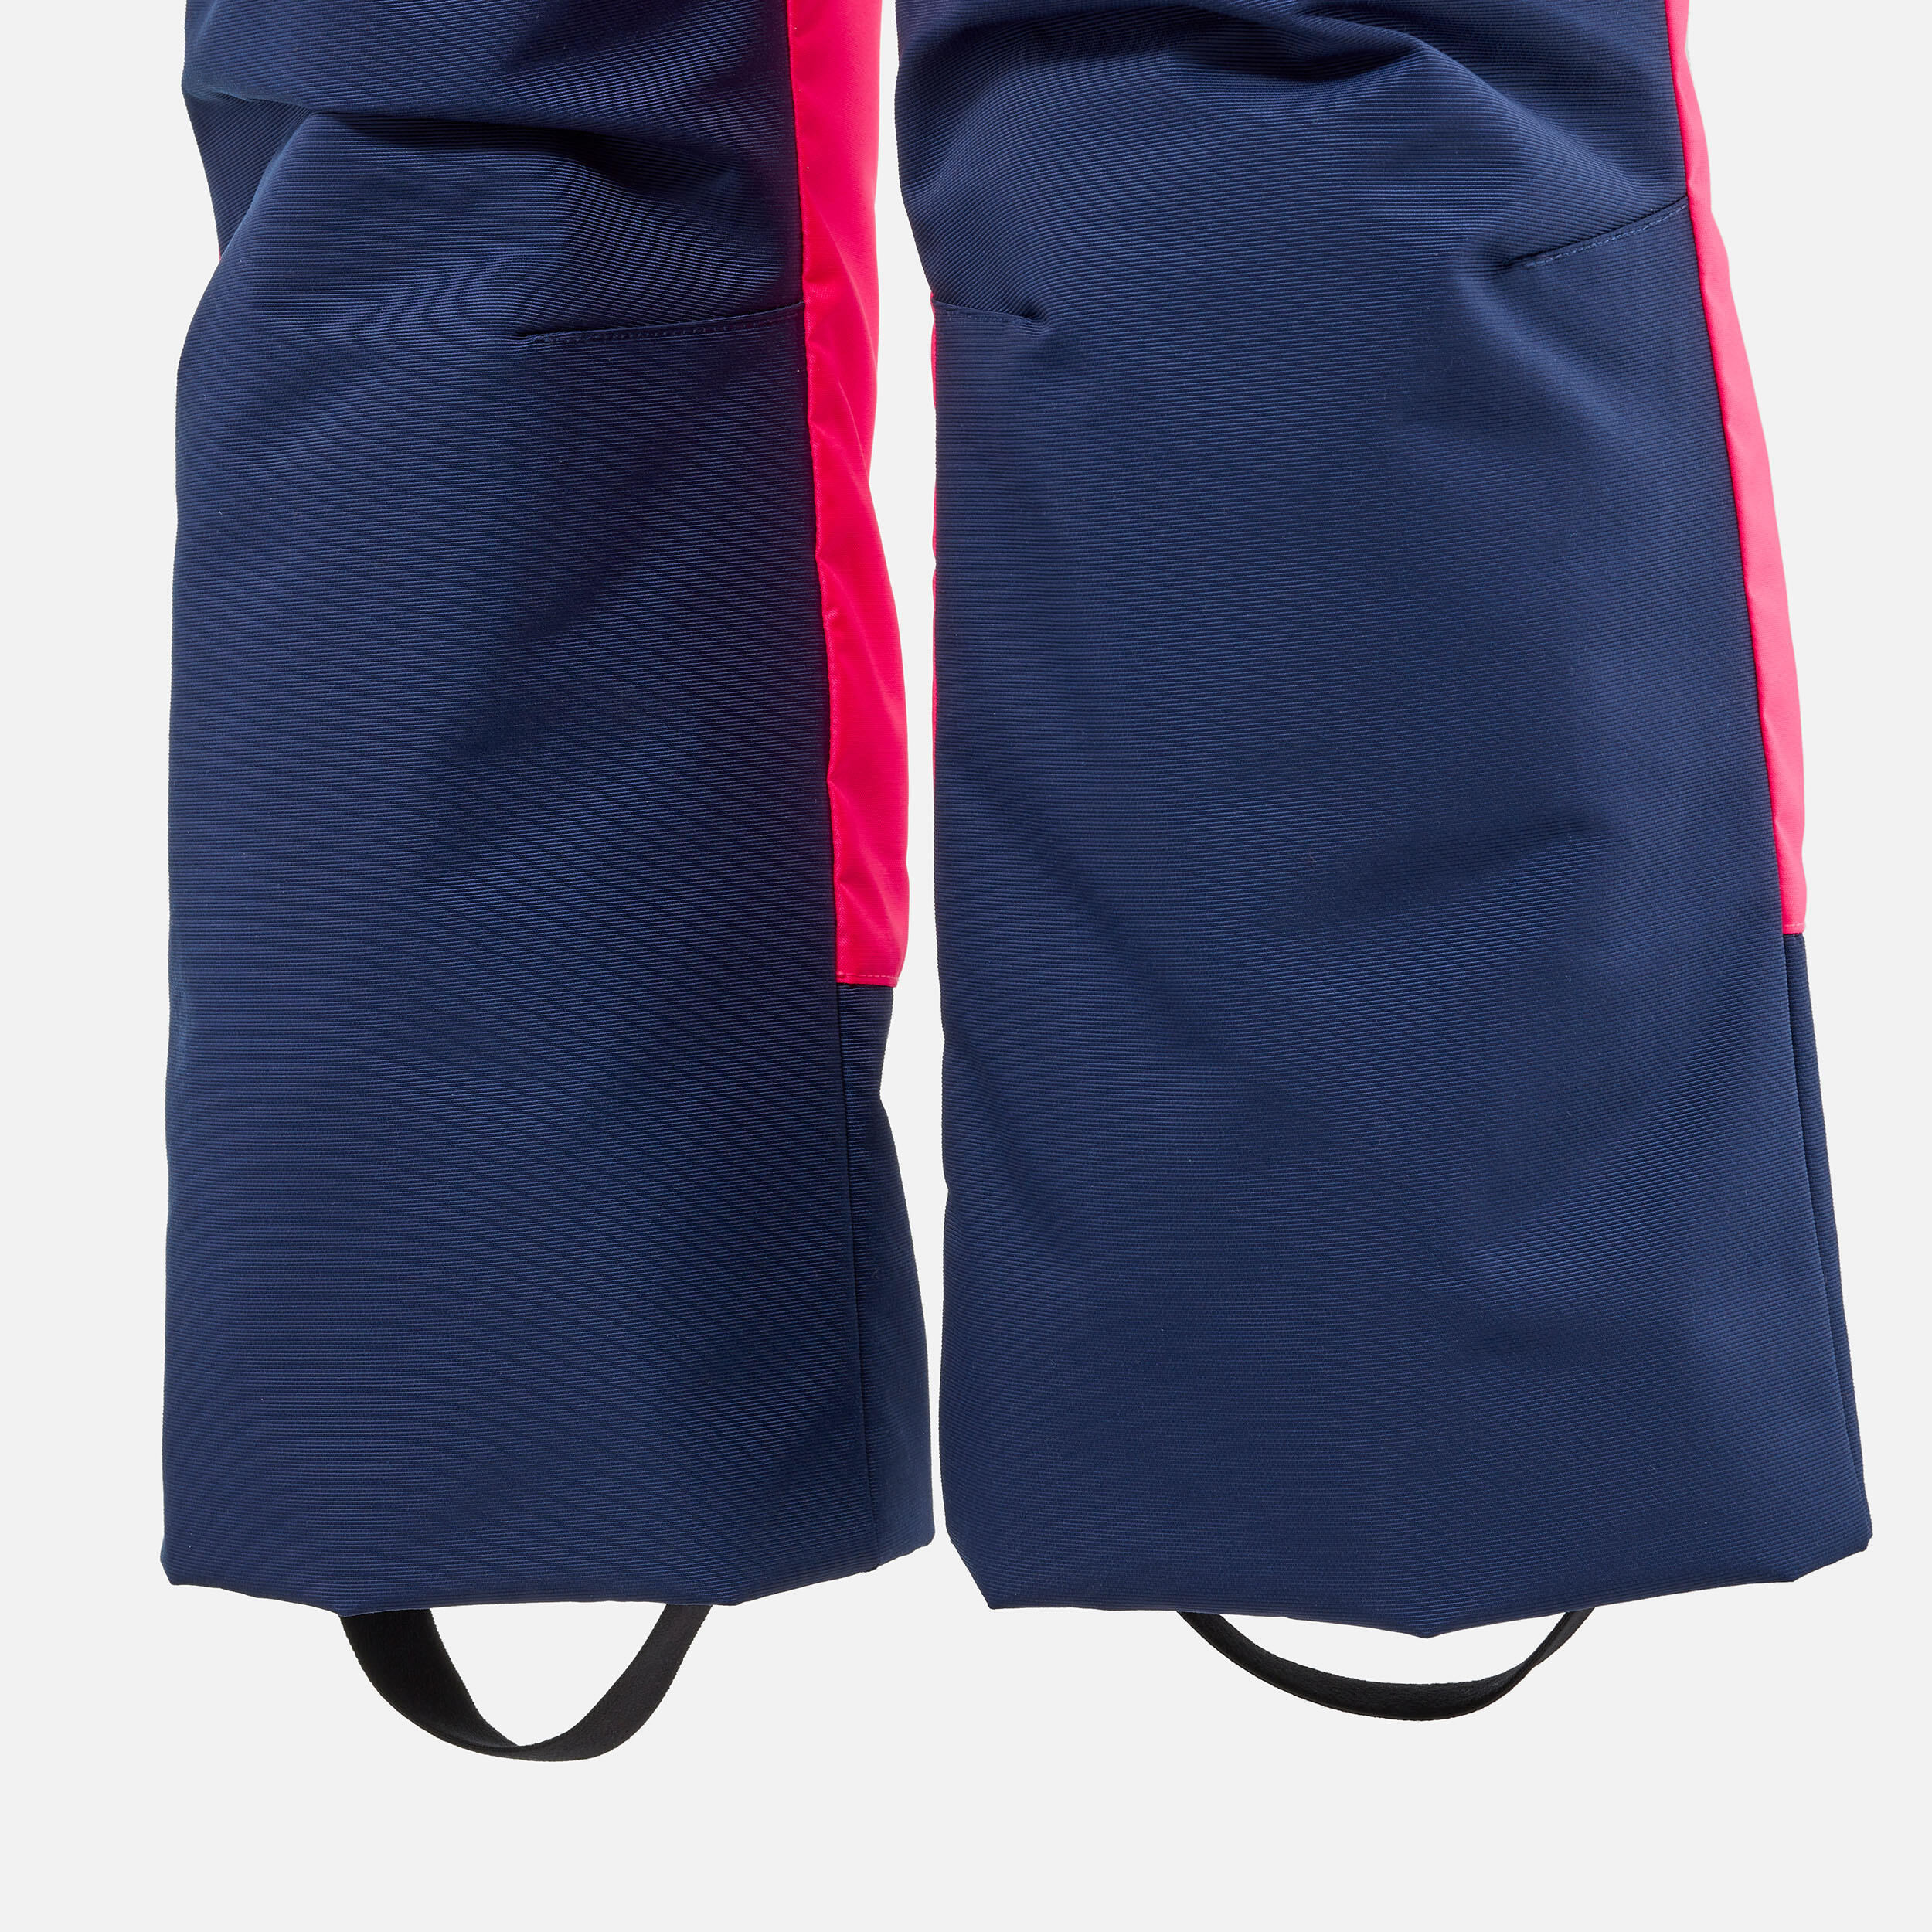 KIDS’ WARM AND WATERPROOF SKI DUNGAREES - 500 PNF - NEON PINK AND NAVY  4/6